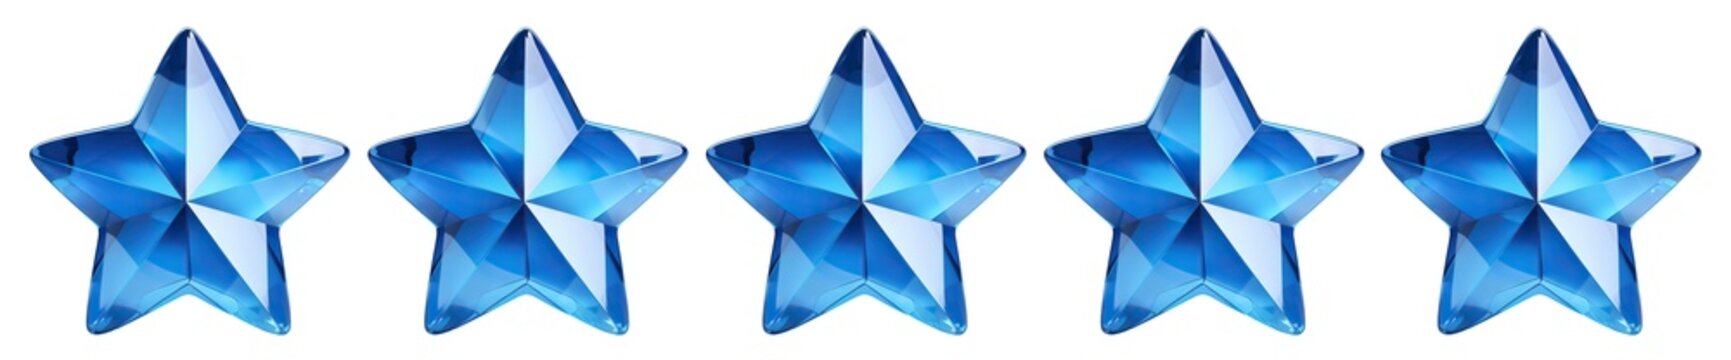 Five blue stars for product rating reviews for websites and mobile applications, cut out